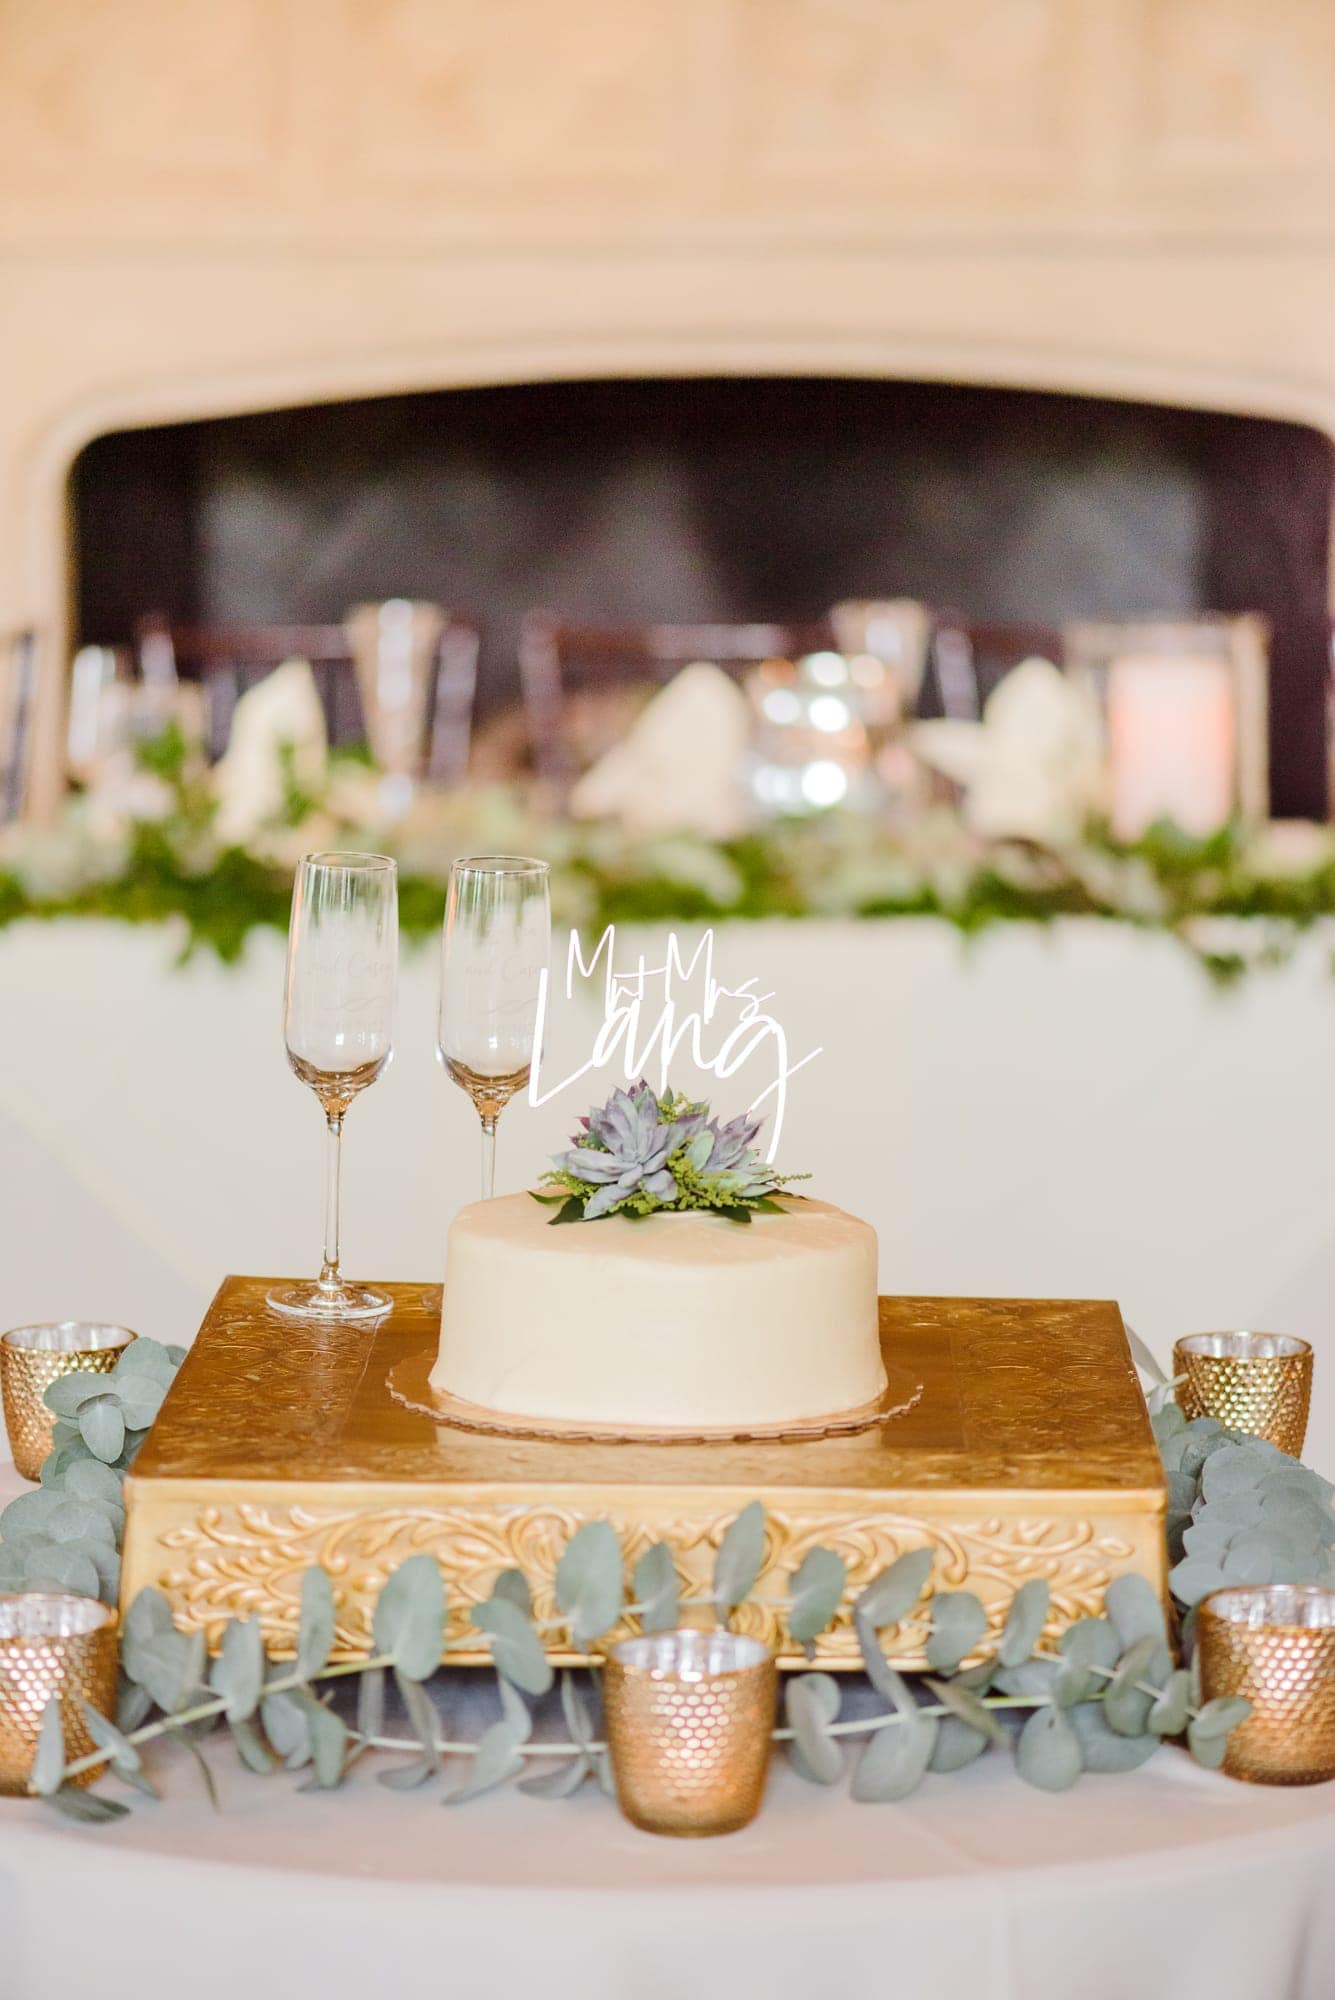 Even though the rest of the reception at the Longview Country Club was over-the-top, the bride and groom opted for a small, simple cake.